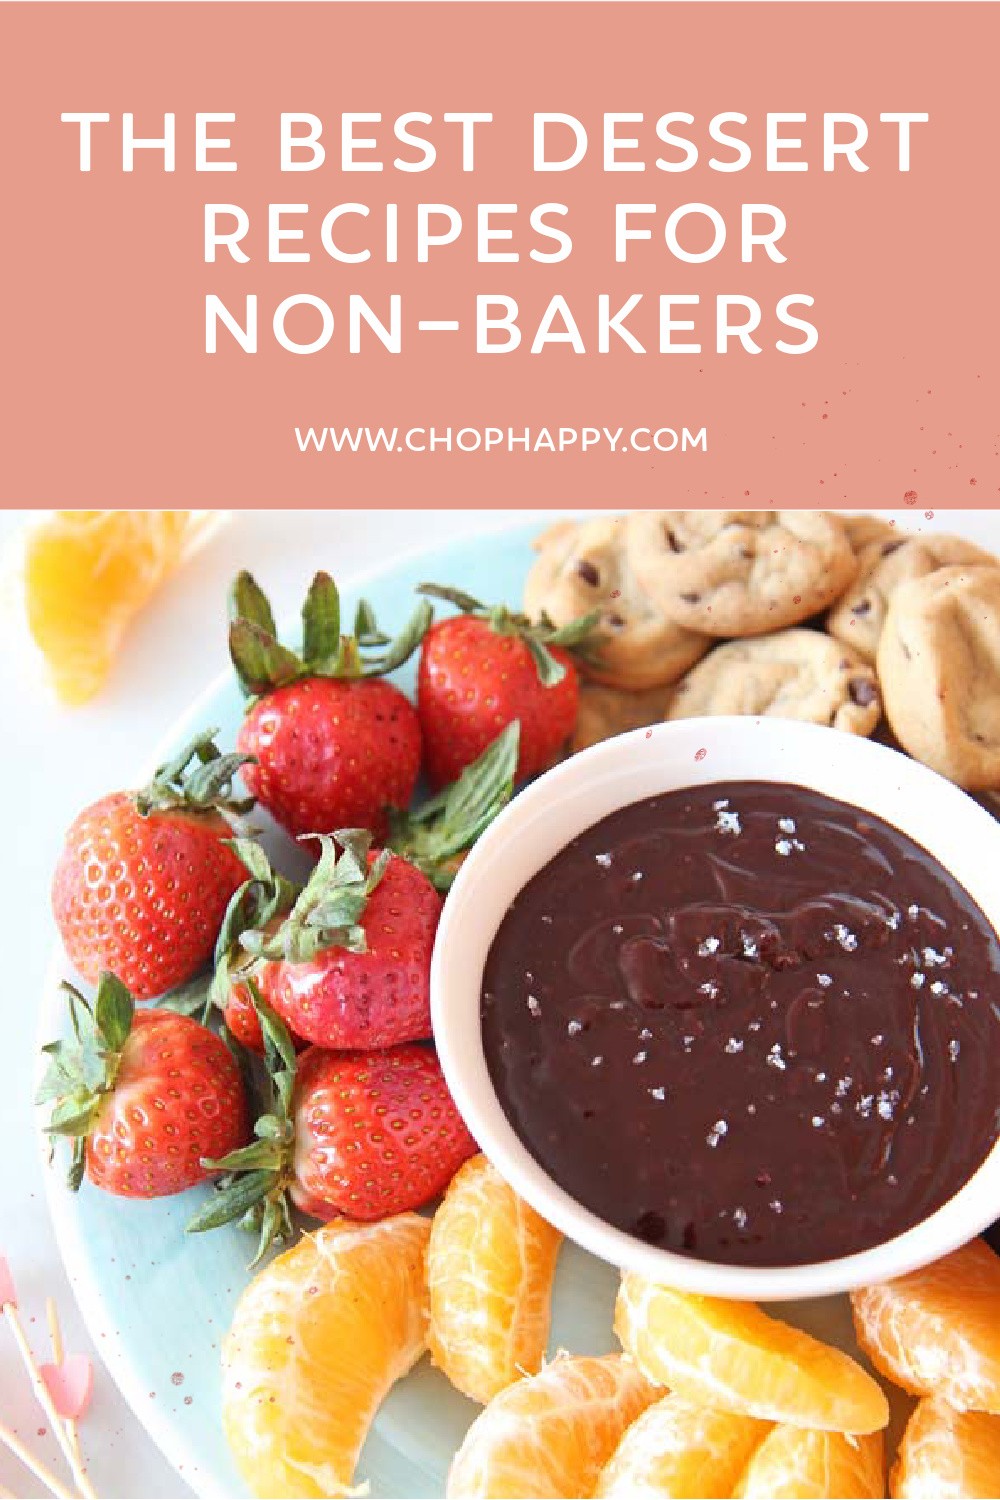 The Best Dessert Recipes For Non-Bakers. Cake, pie, fondue and other desserts for non-bakers. Happy Baking! www.ChopHappy.com #non-bakers #nobake